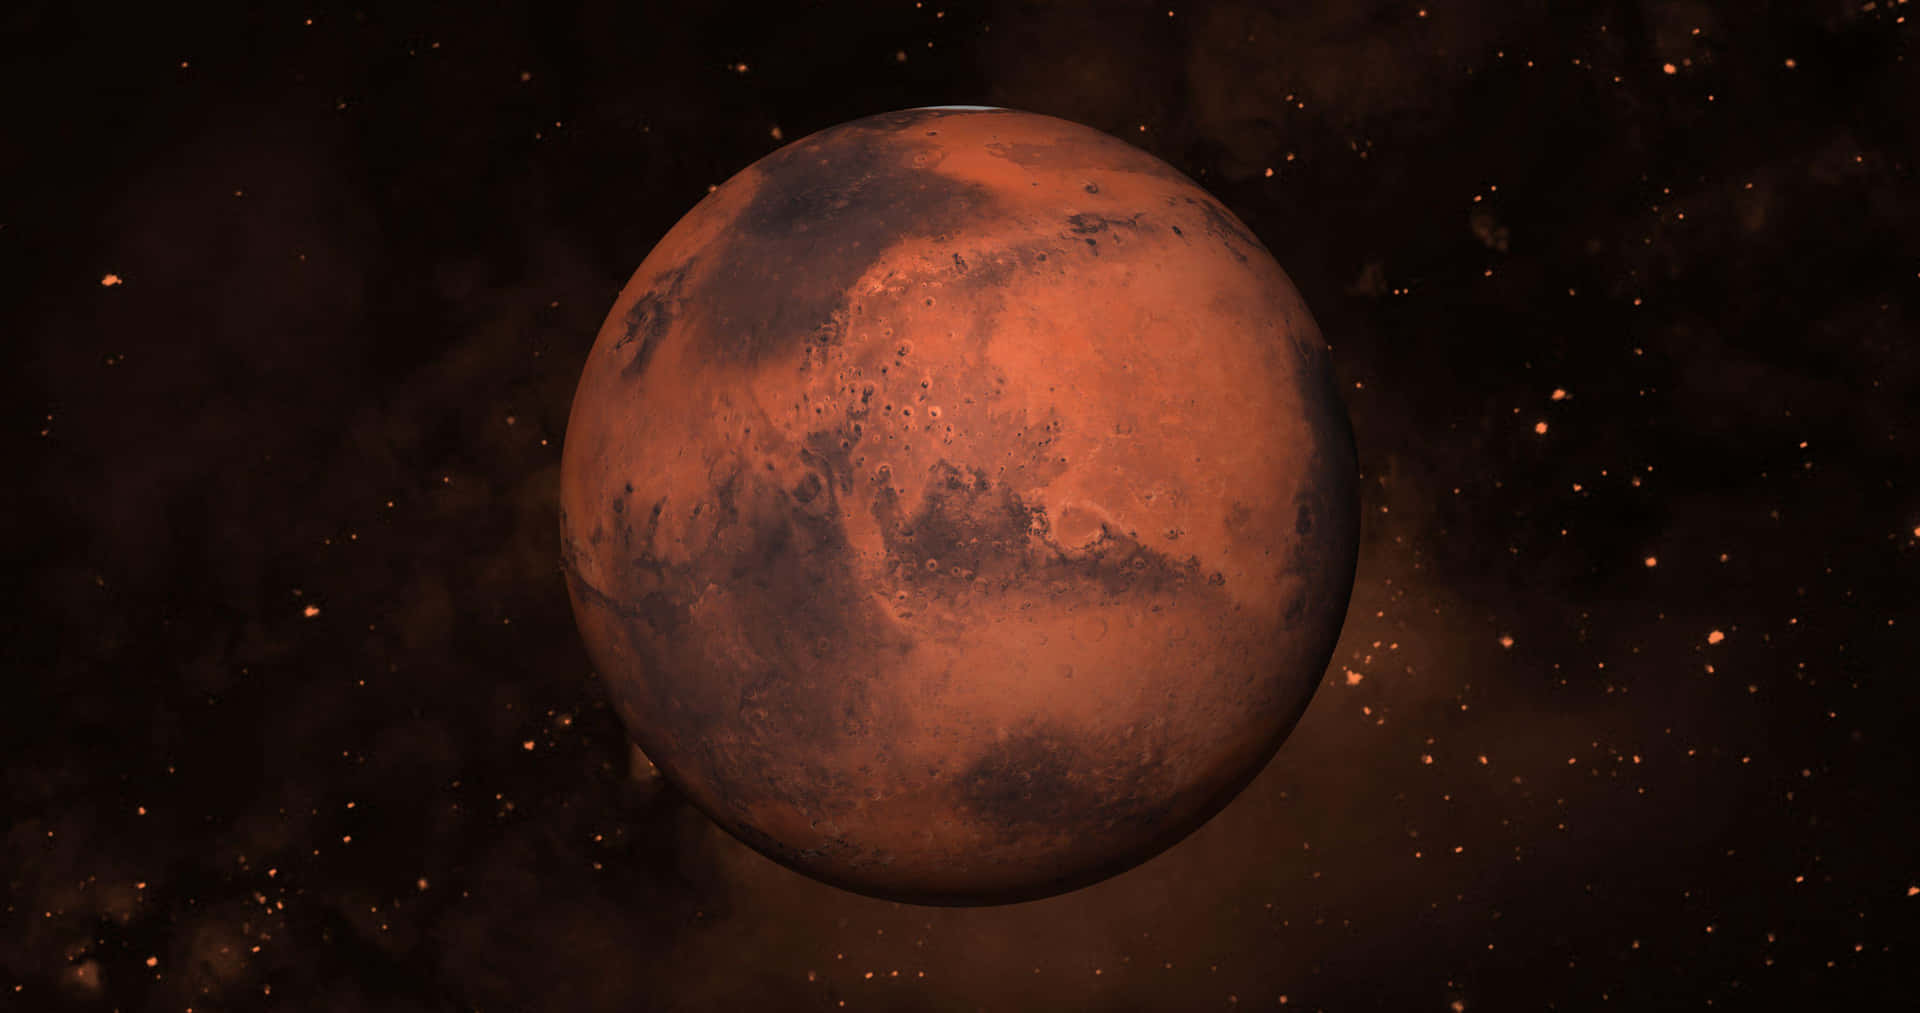 Mars - Where dreams of exploration come to life